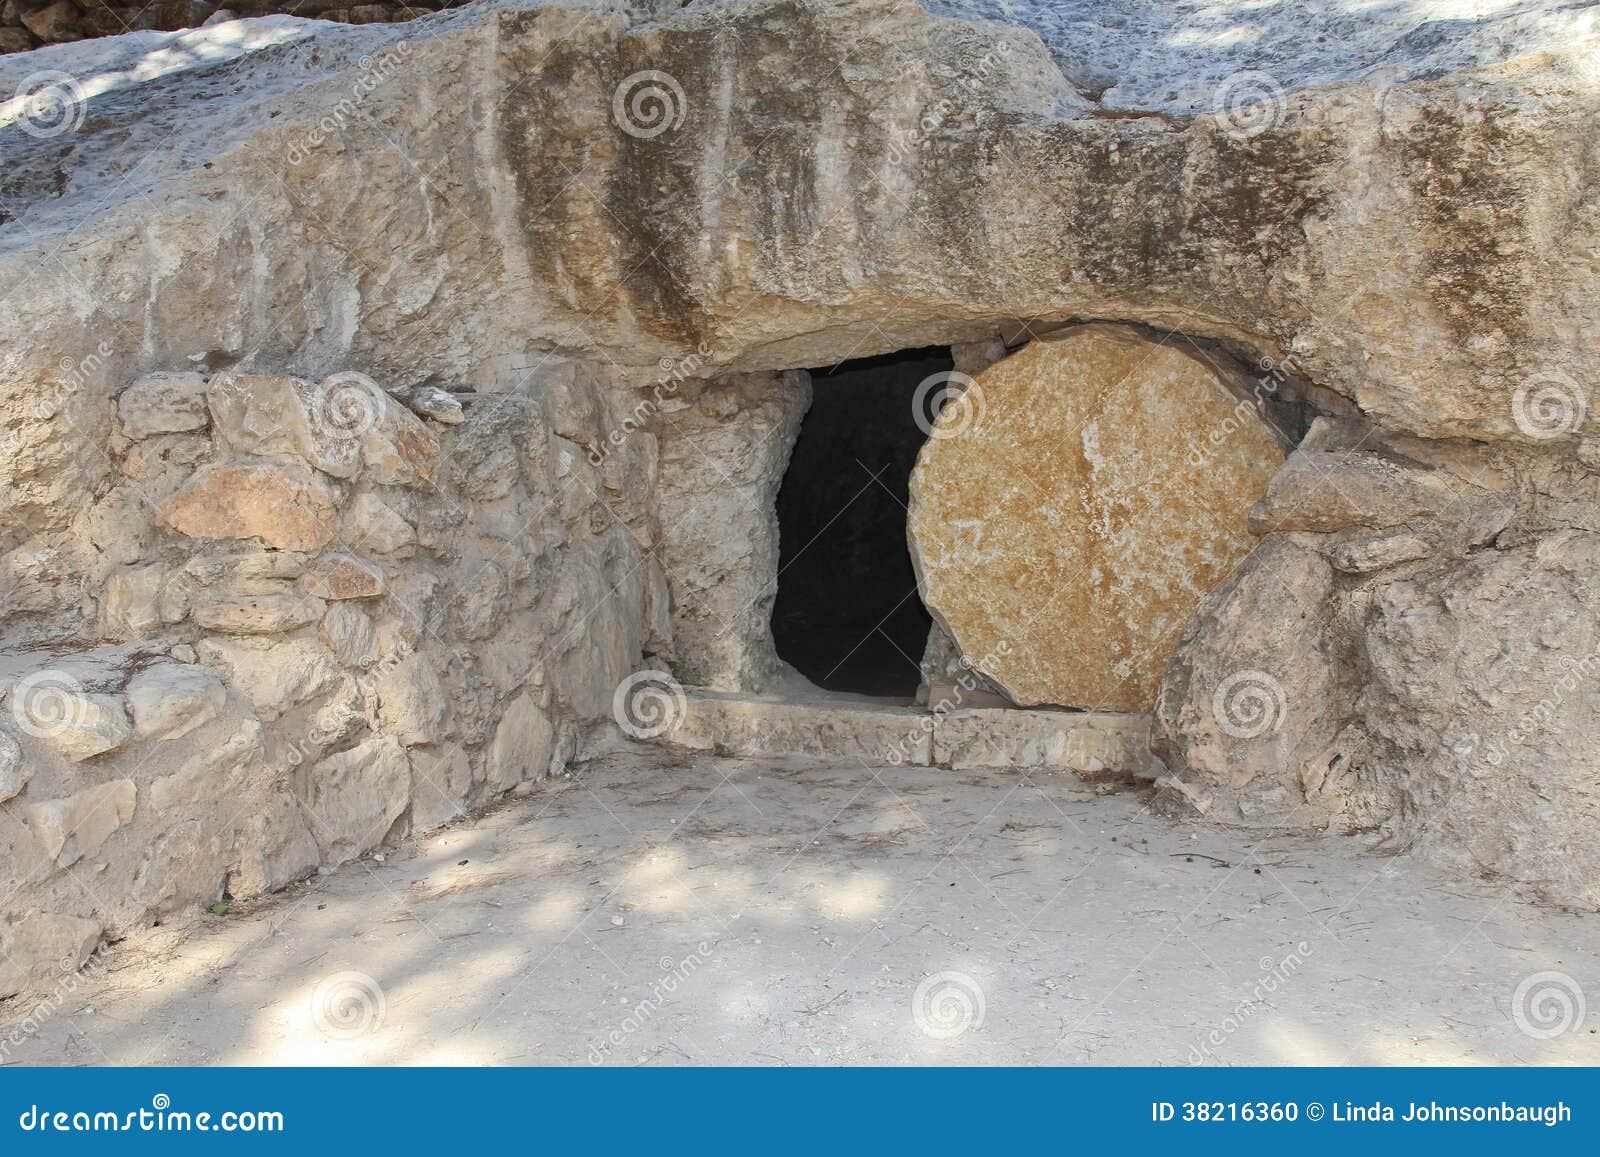 replica of the tomb of jesus in israel